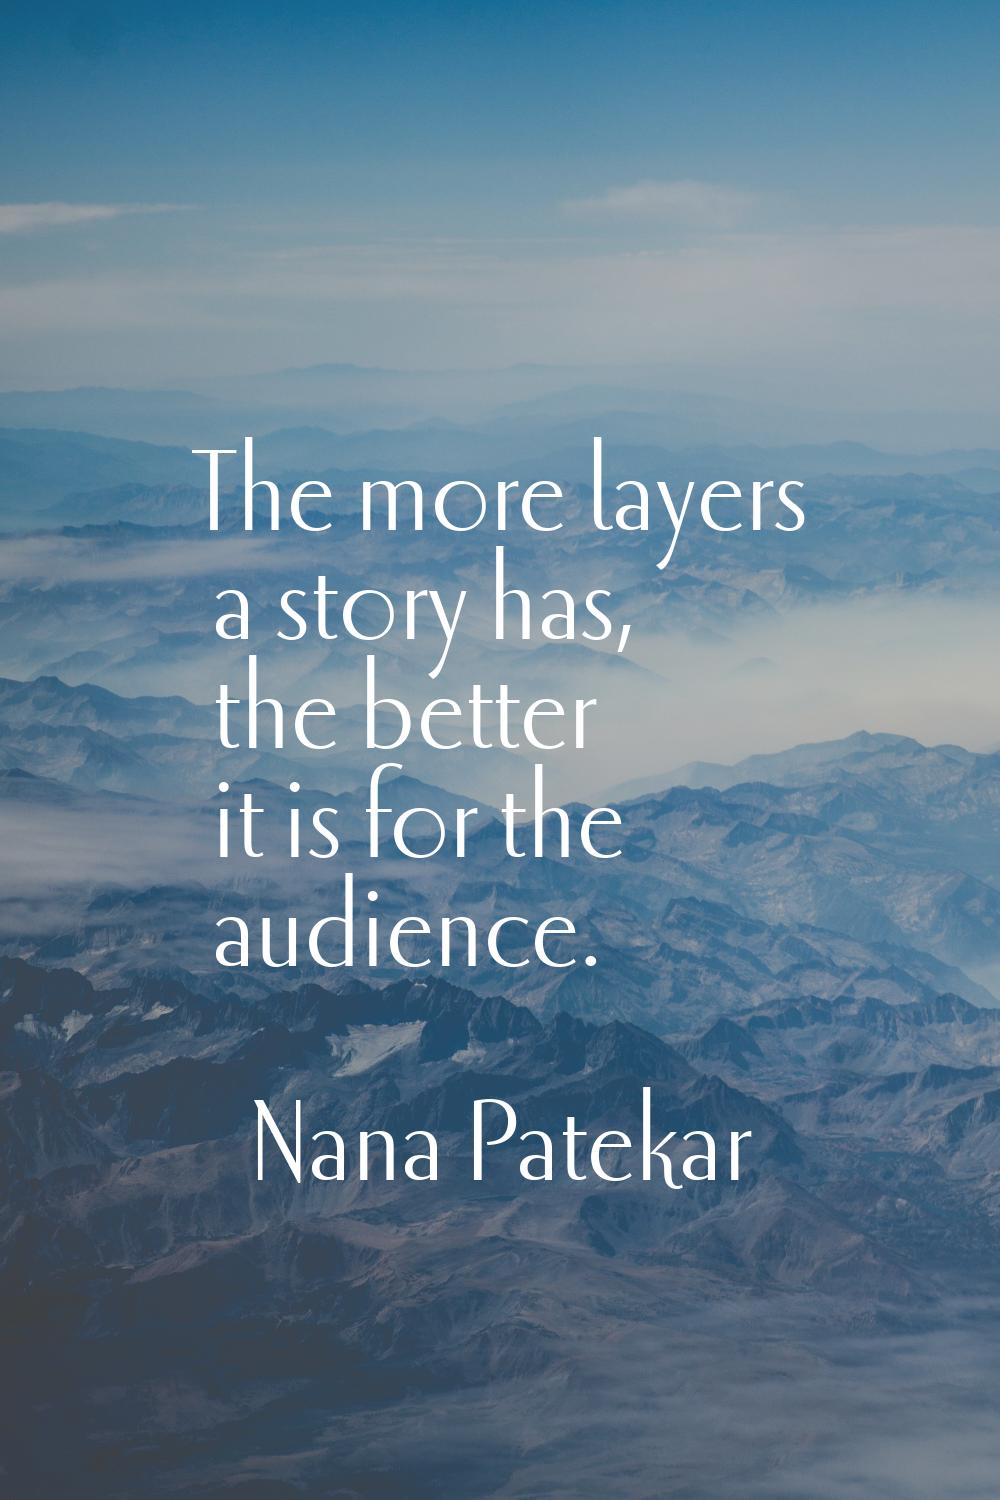 The more layers a story has, the better it is for the audience.